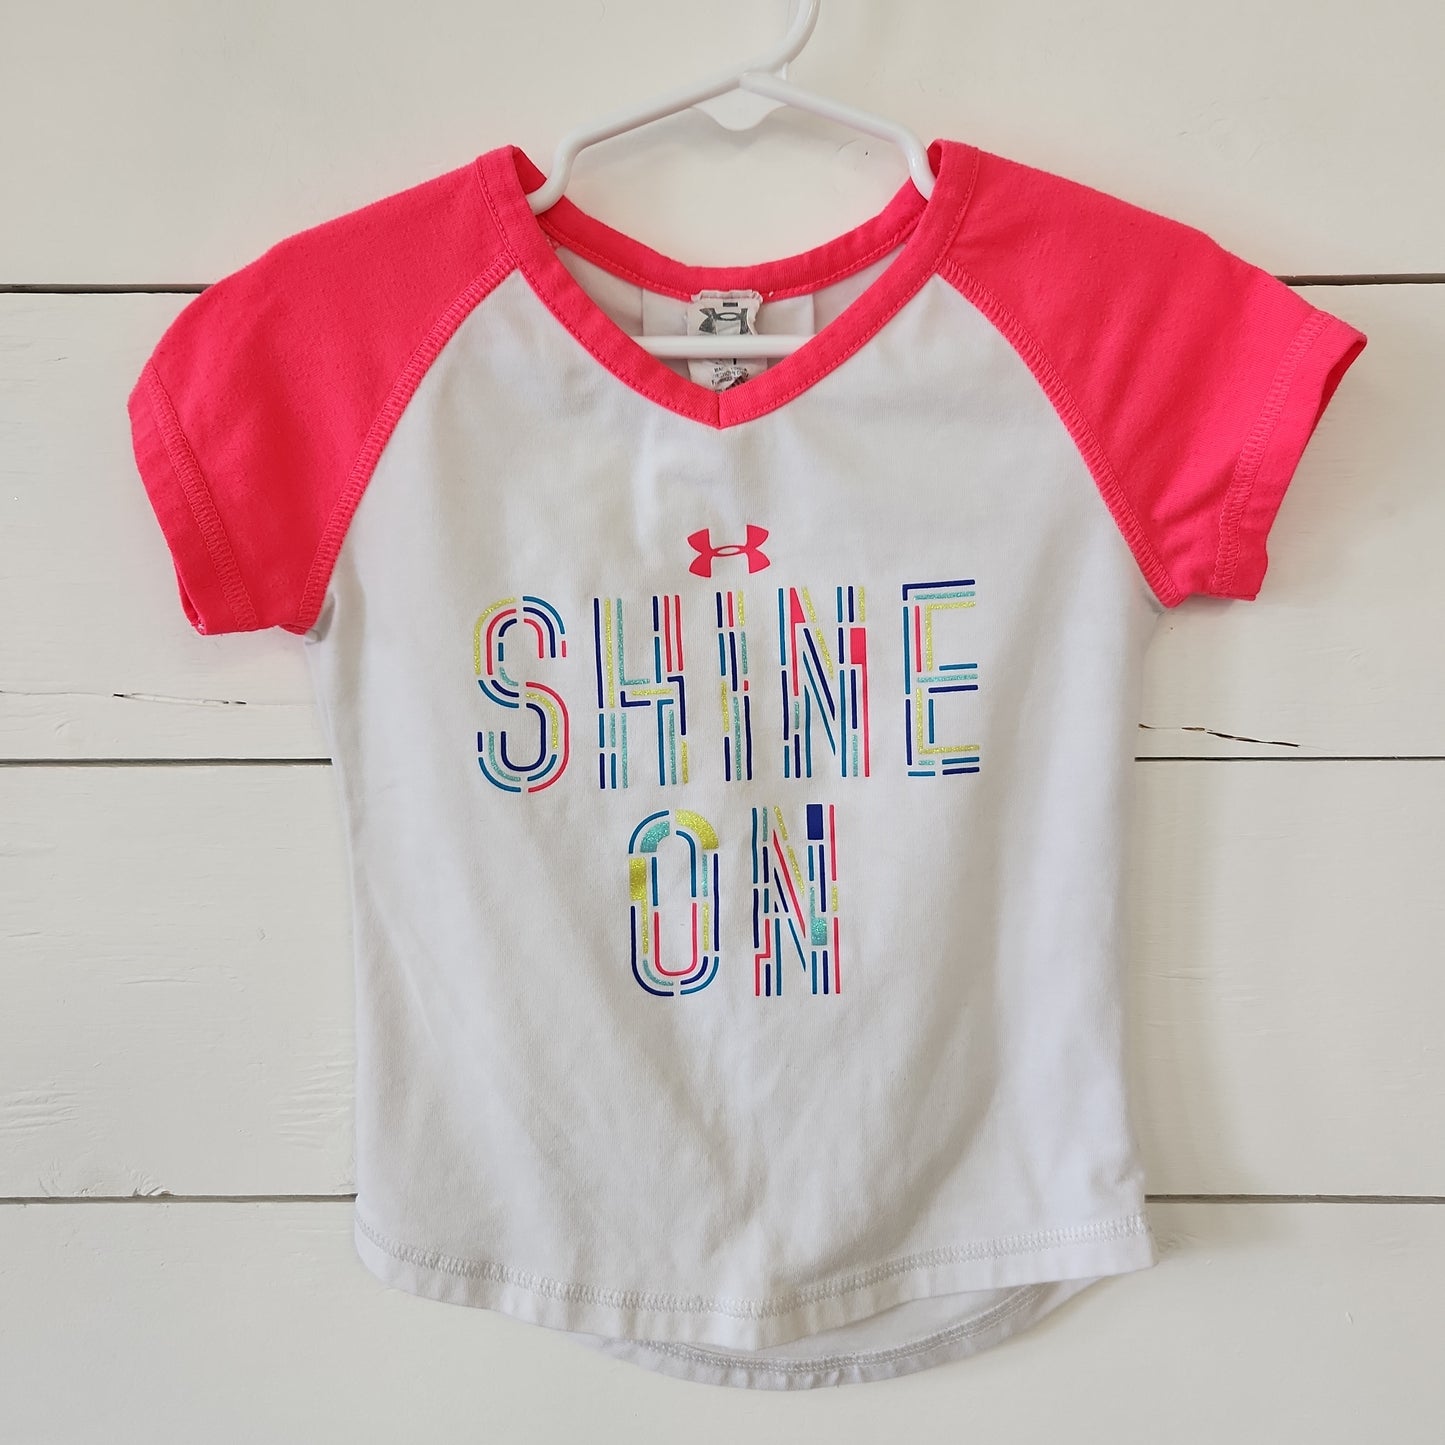 Size 3t | Under Armour Shirt